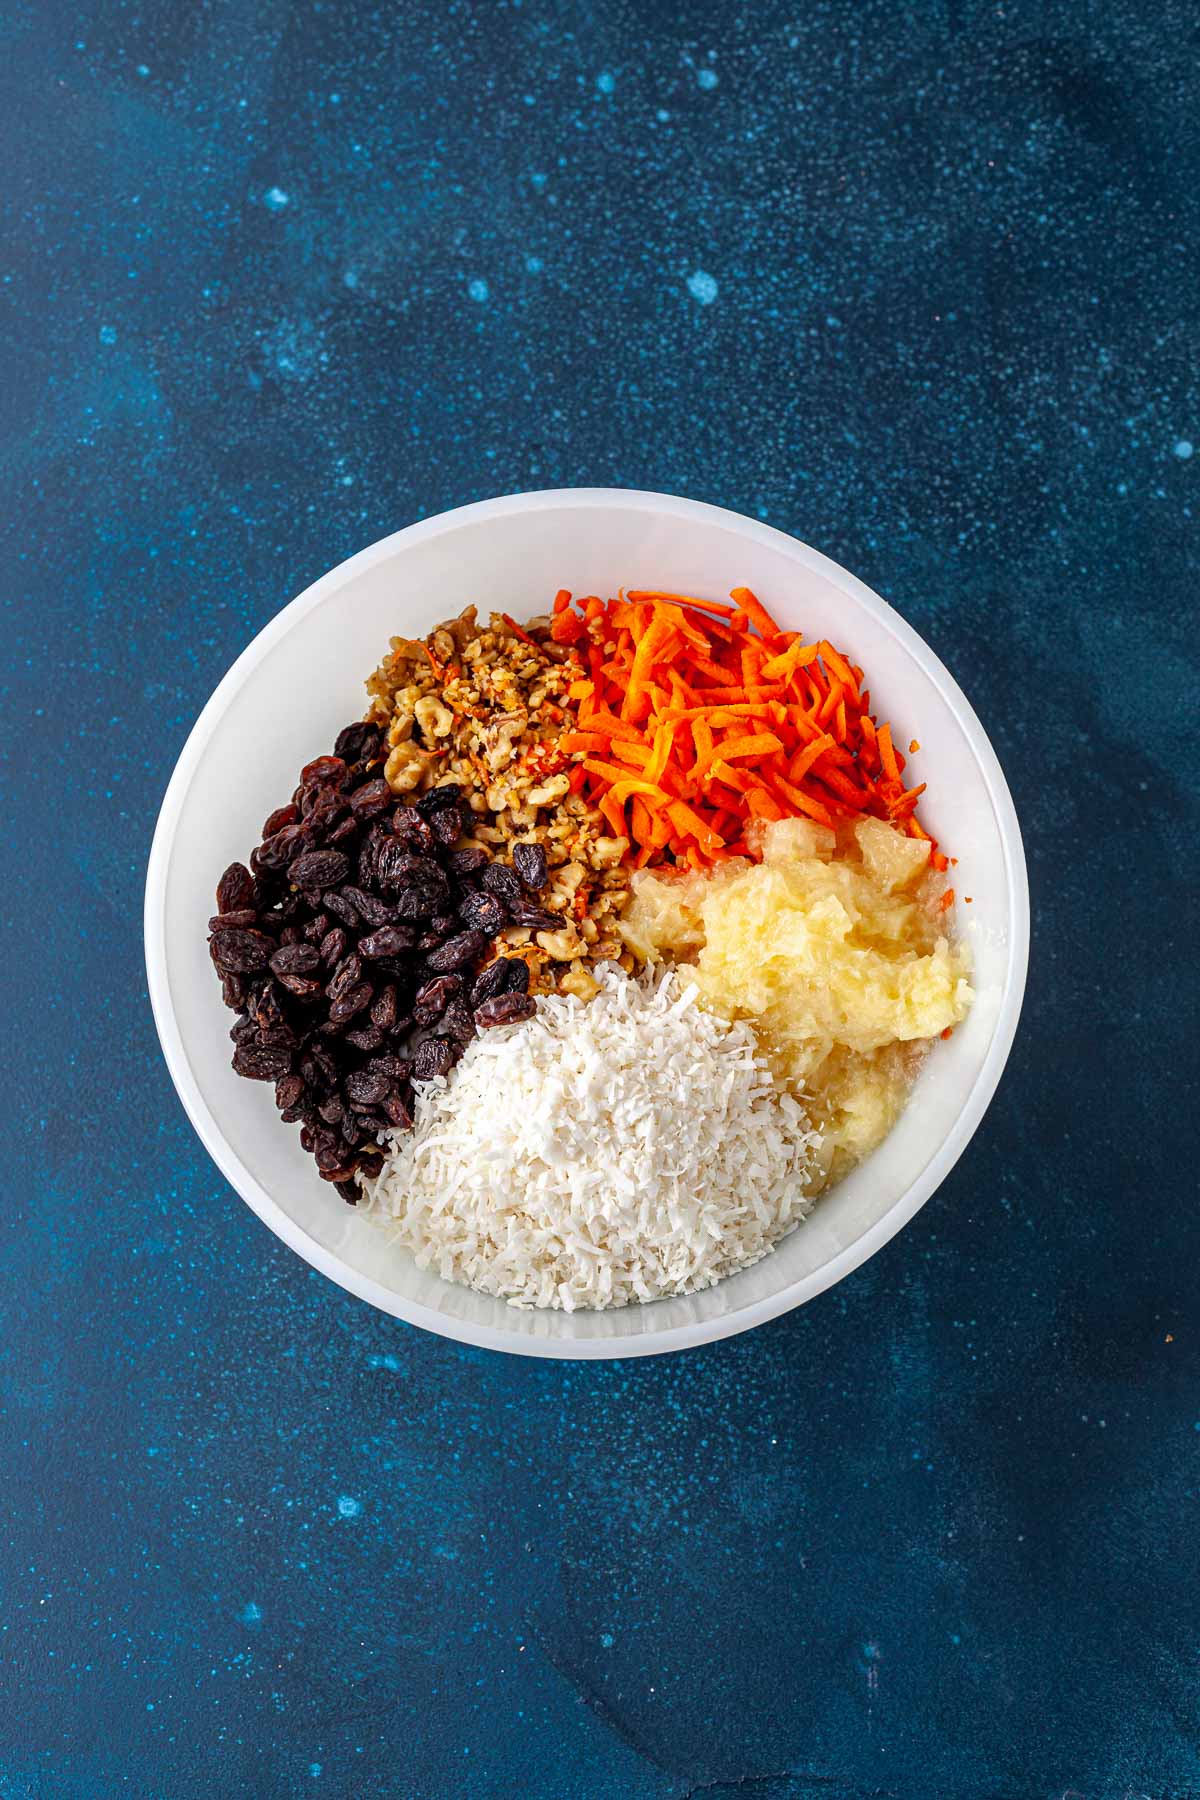 Grated carrots, chopped walnuts, raisins, shredded coconut, and crushed pineapple in a bowl.